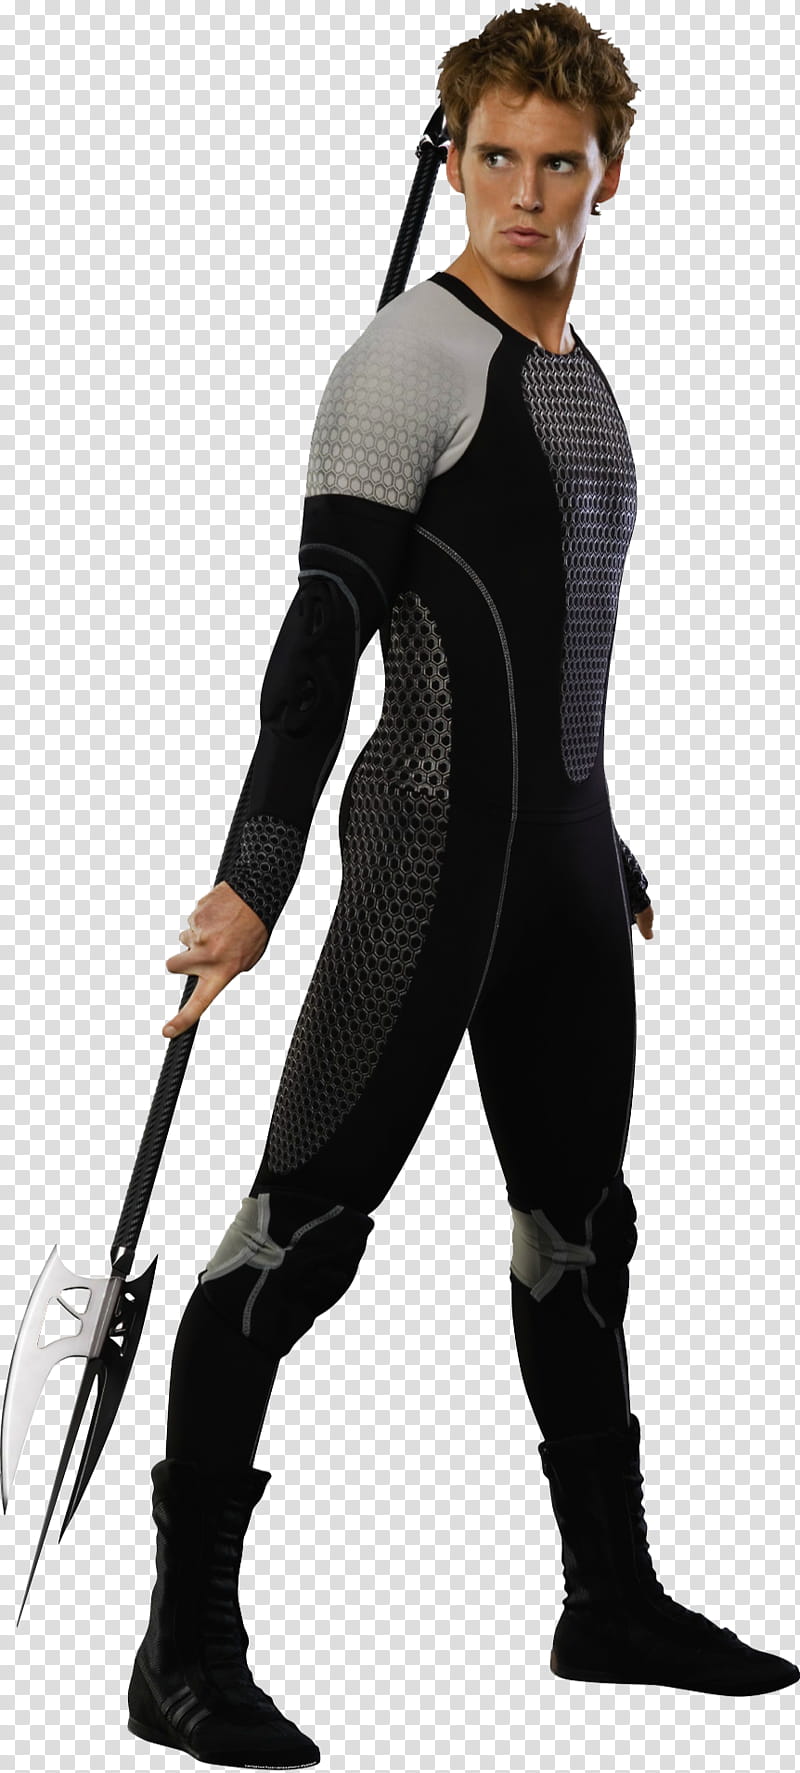 Finnick Odair Catching Fire, man wearing black and white wetsuit holding weaponm transparent background PNG clipart